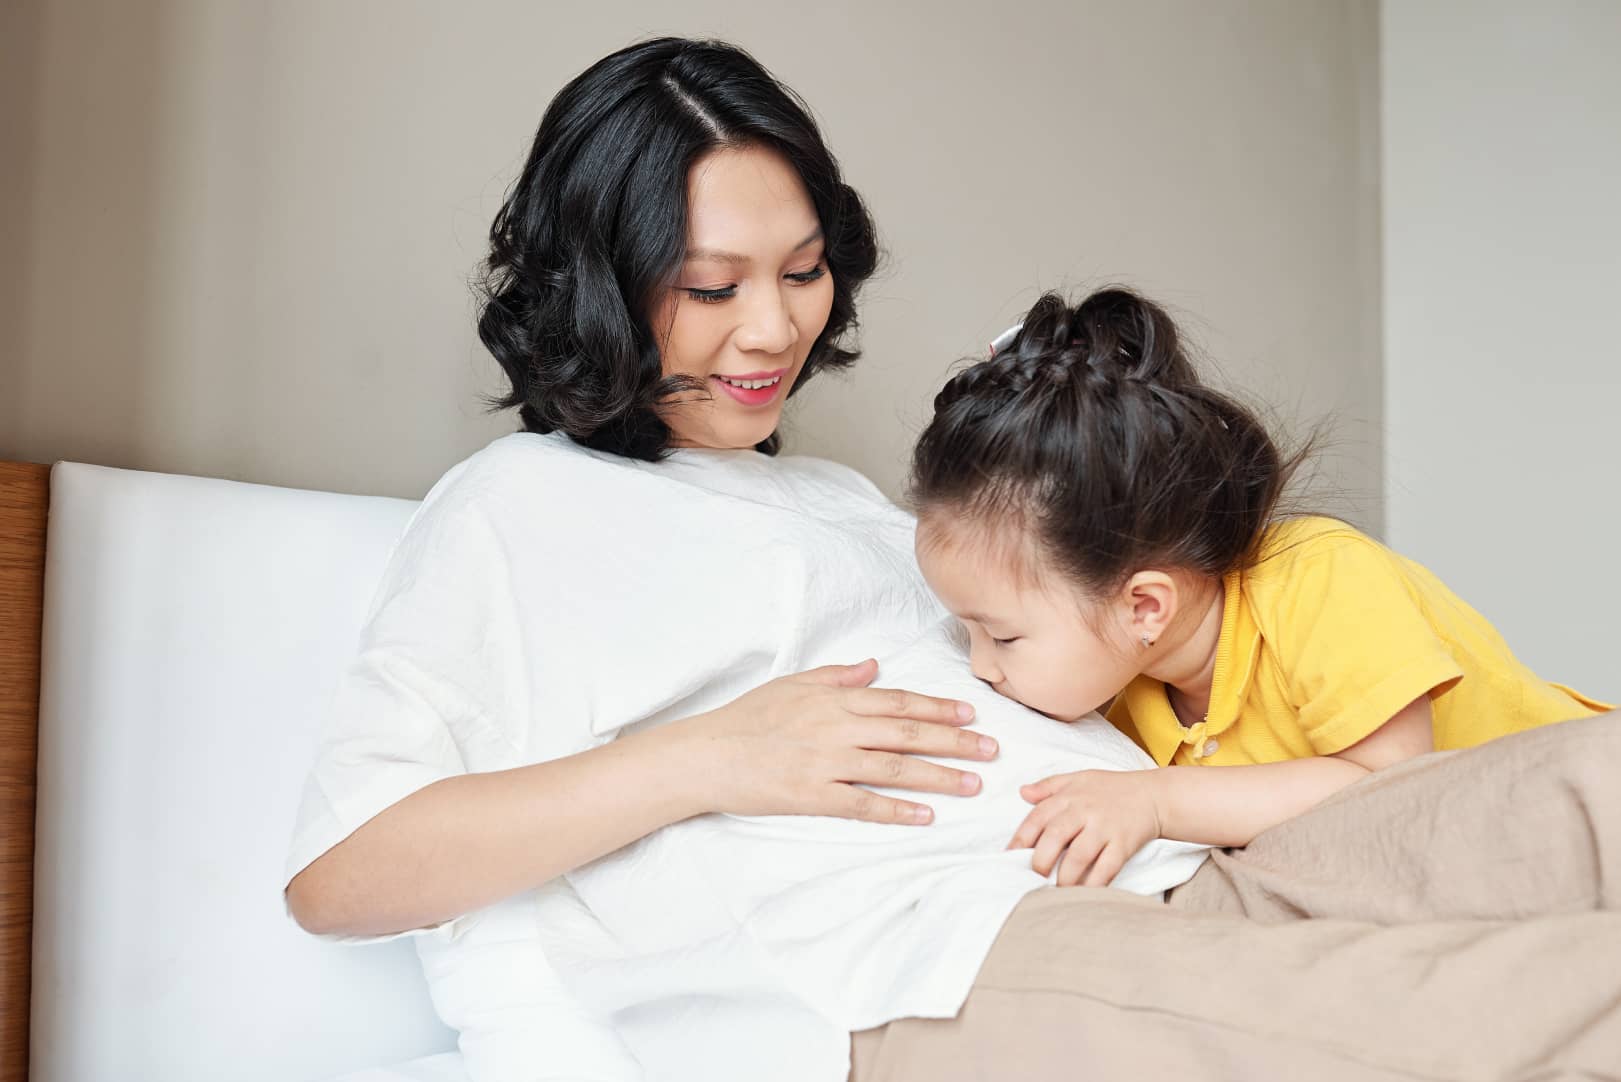 A FEW REASONS TO BECOME A SURROGATE MOTHER